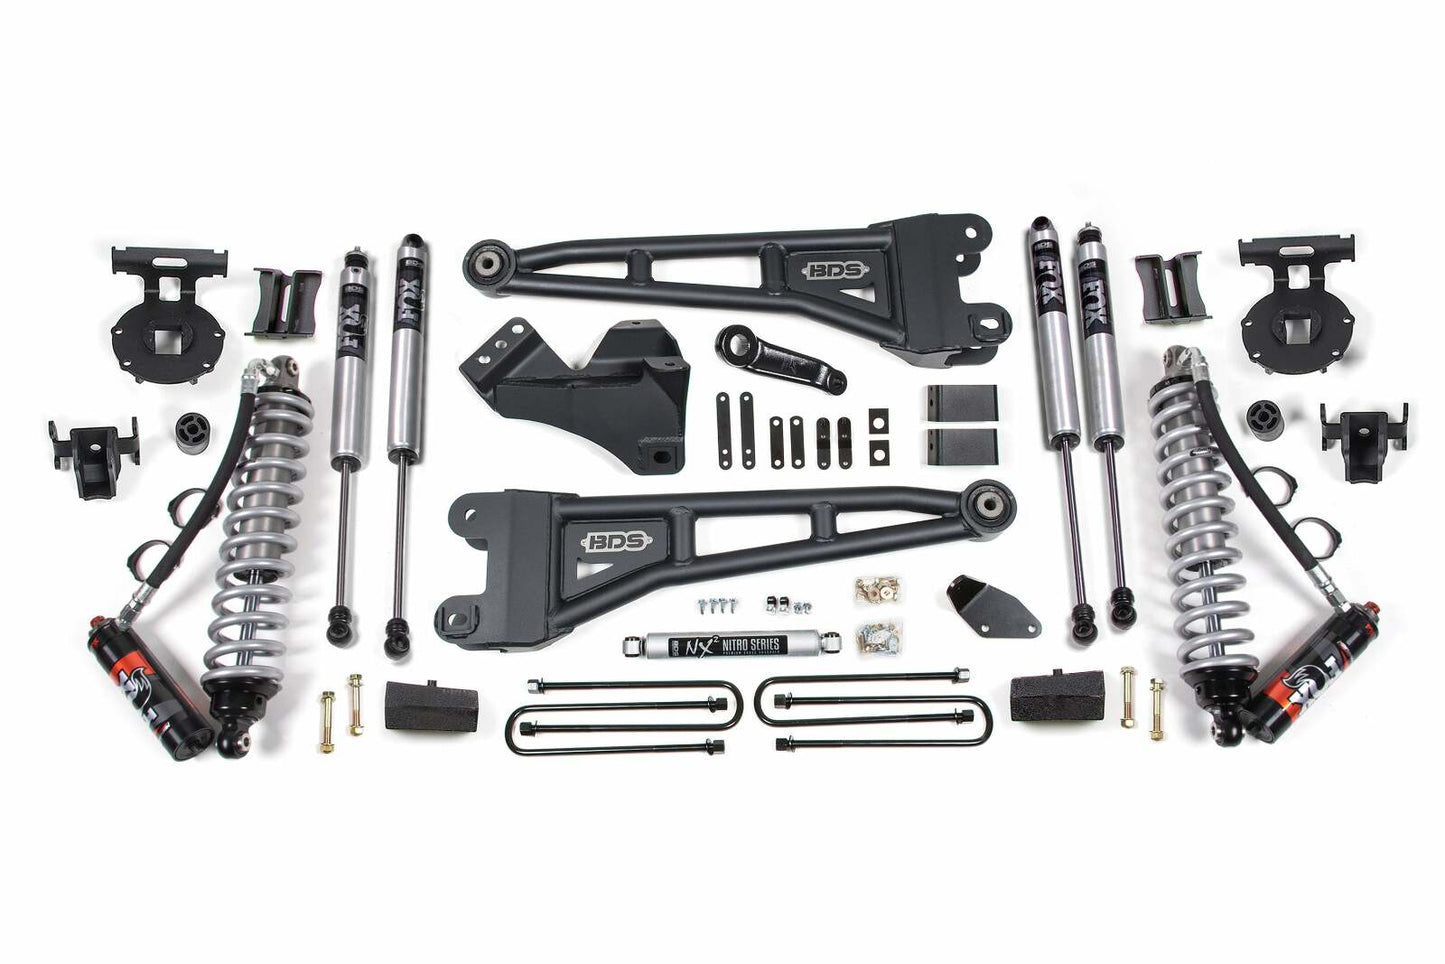 2005-2007 Ford F250/F350 4wd 4" Radius Arm Suspension Lift Kit,  3" Rear Lift, Block, Diesel, With Overload - Fox 2.5 PES C/O Front, Fox 2.0 IFP PS Aux Front, Fox 2.0 IFP PS Rear